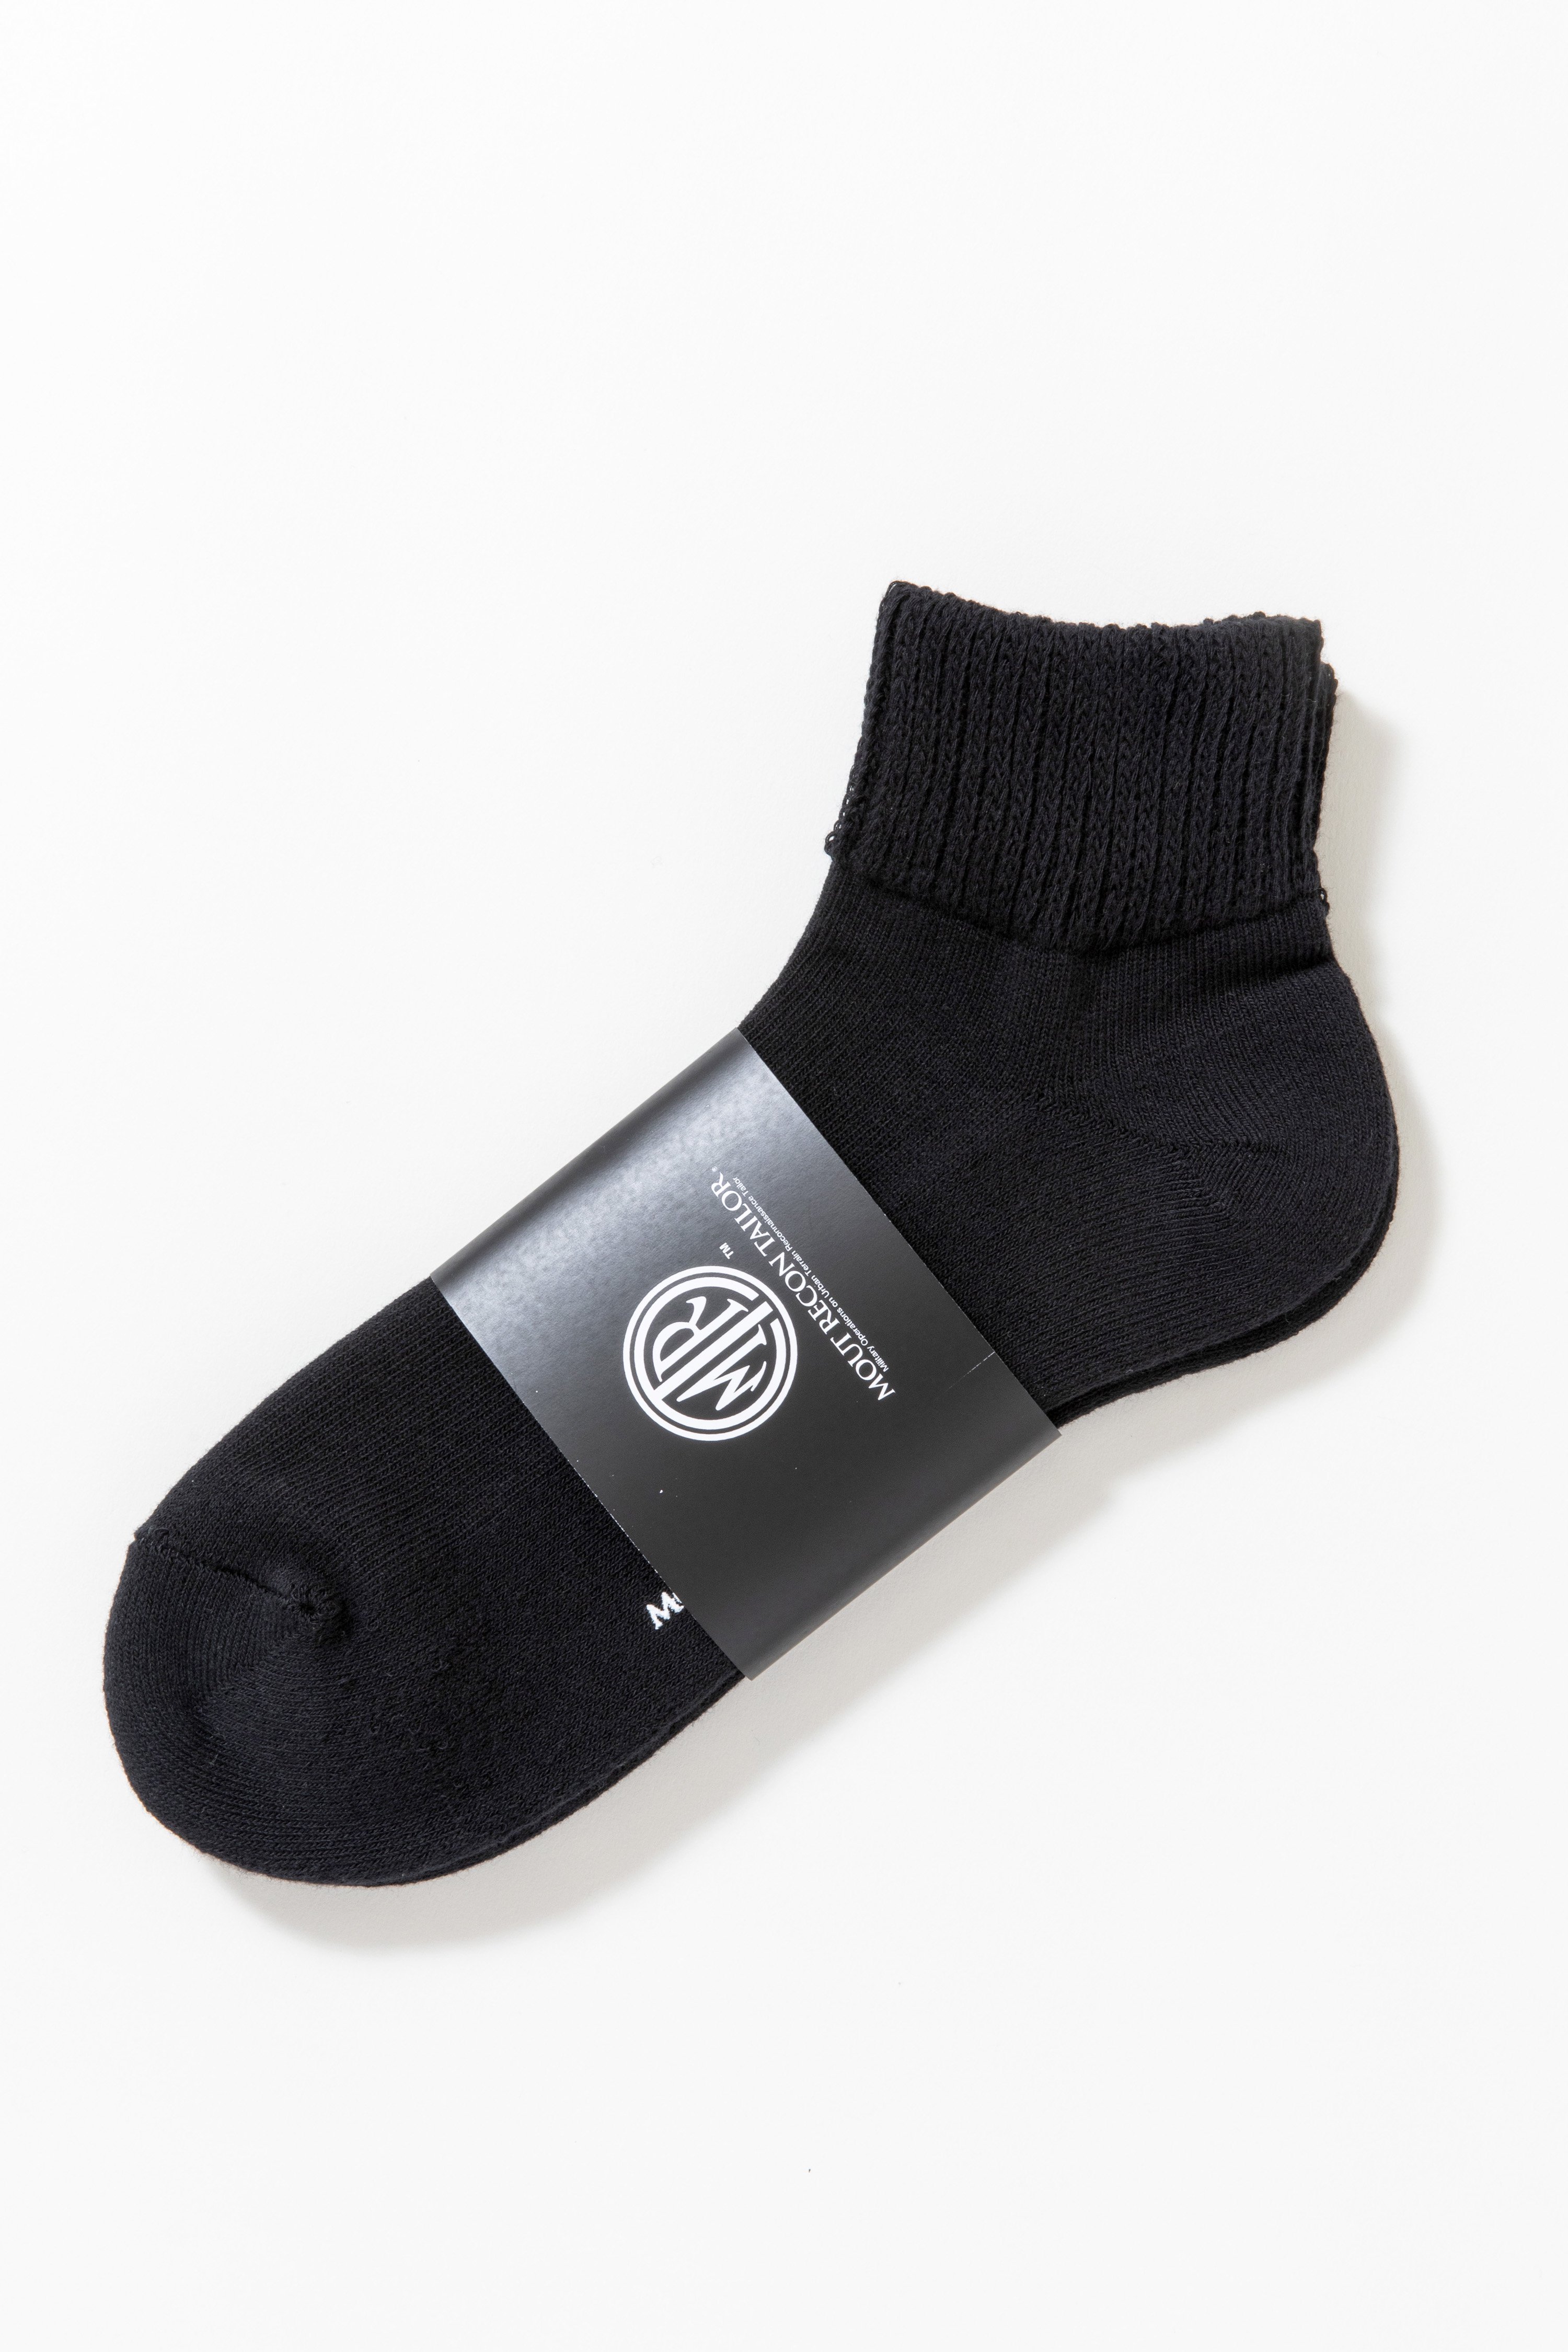 mout recon tailor anti microbial ankle length sock